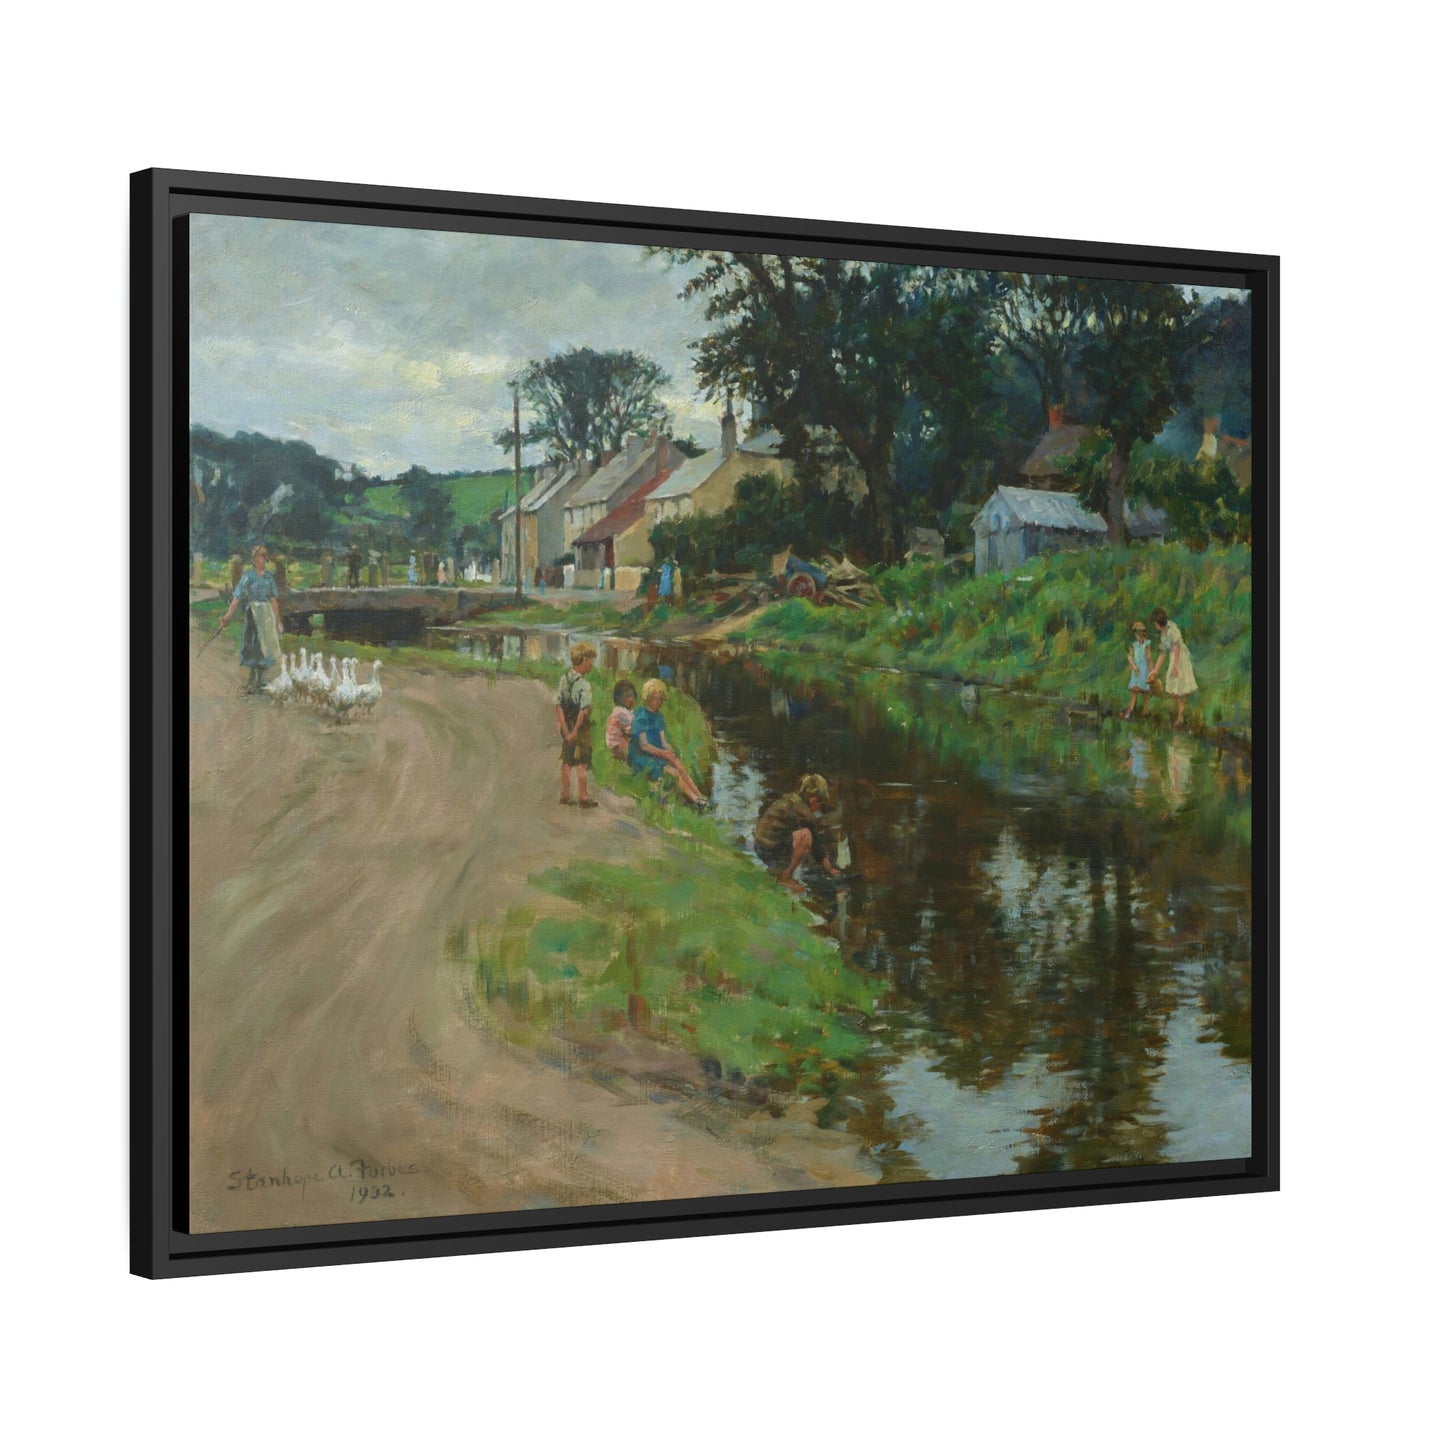 Stanhope Alexander Forbes: "At the Water's Edge, Hayle, Cornwall" - Framed Canvas Reproduction